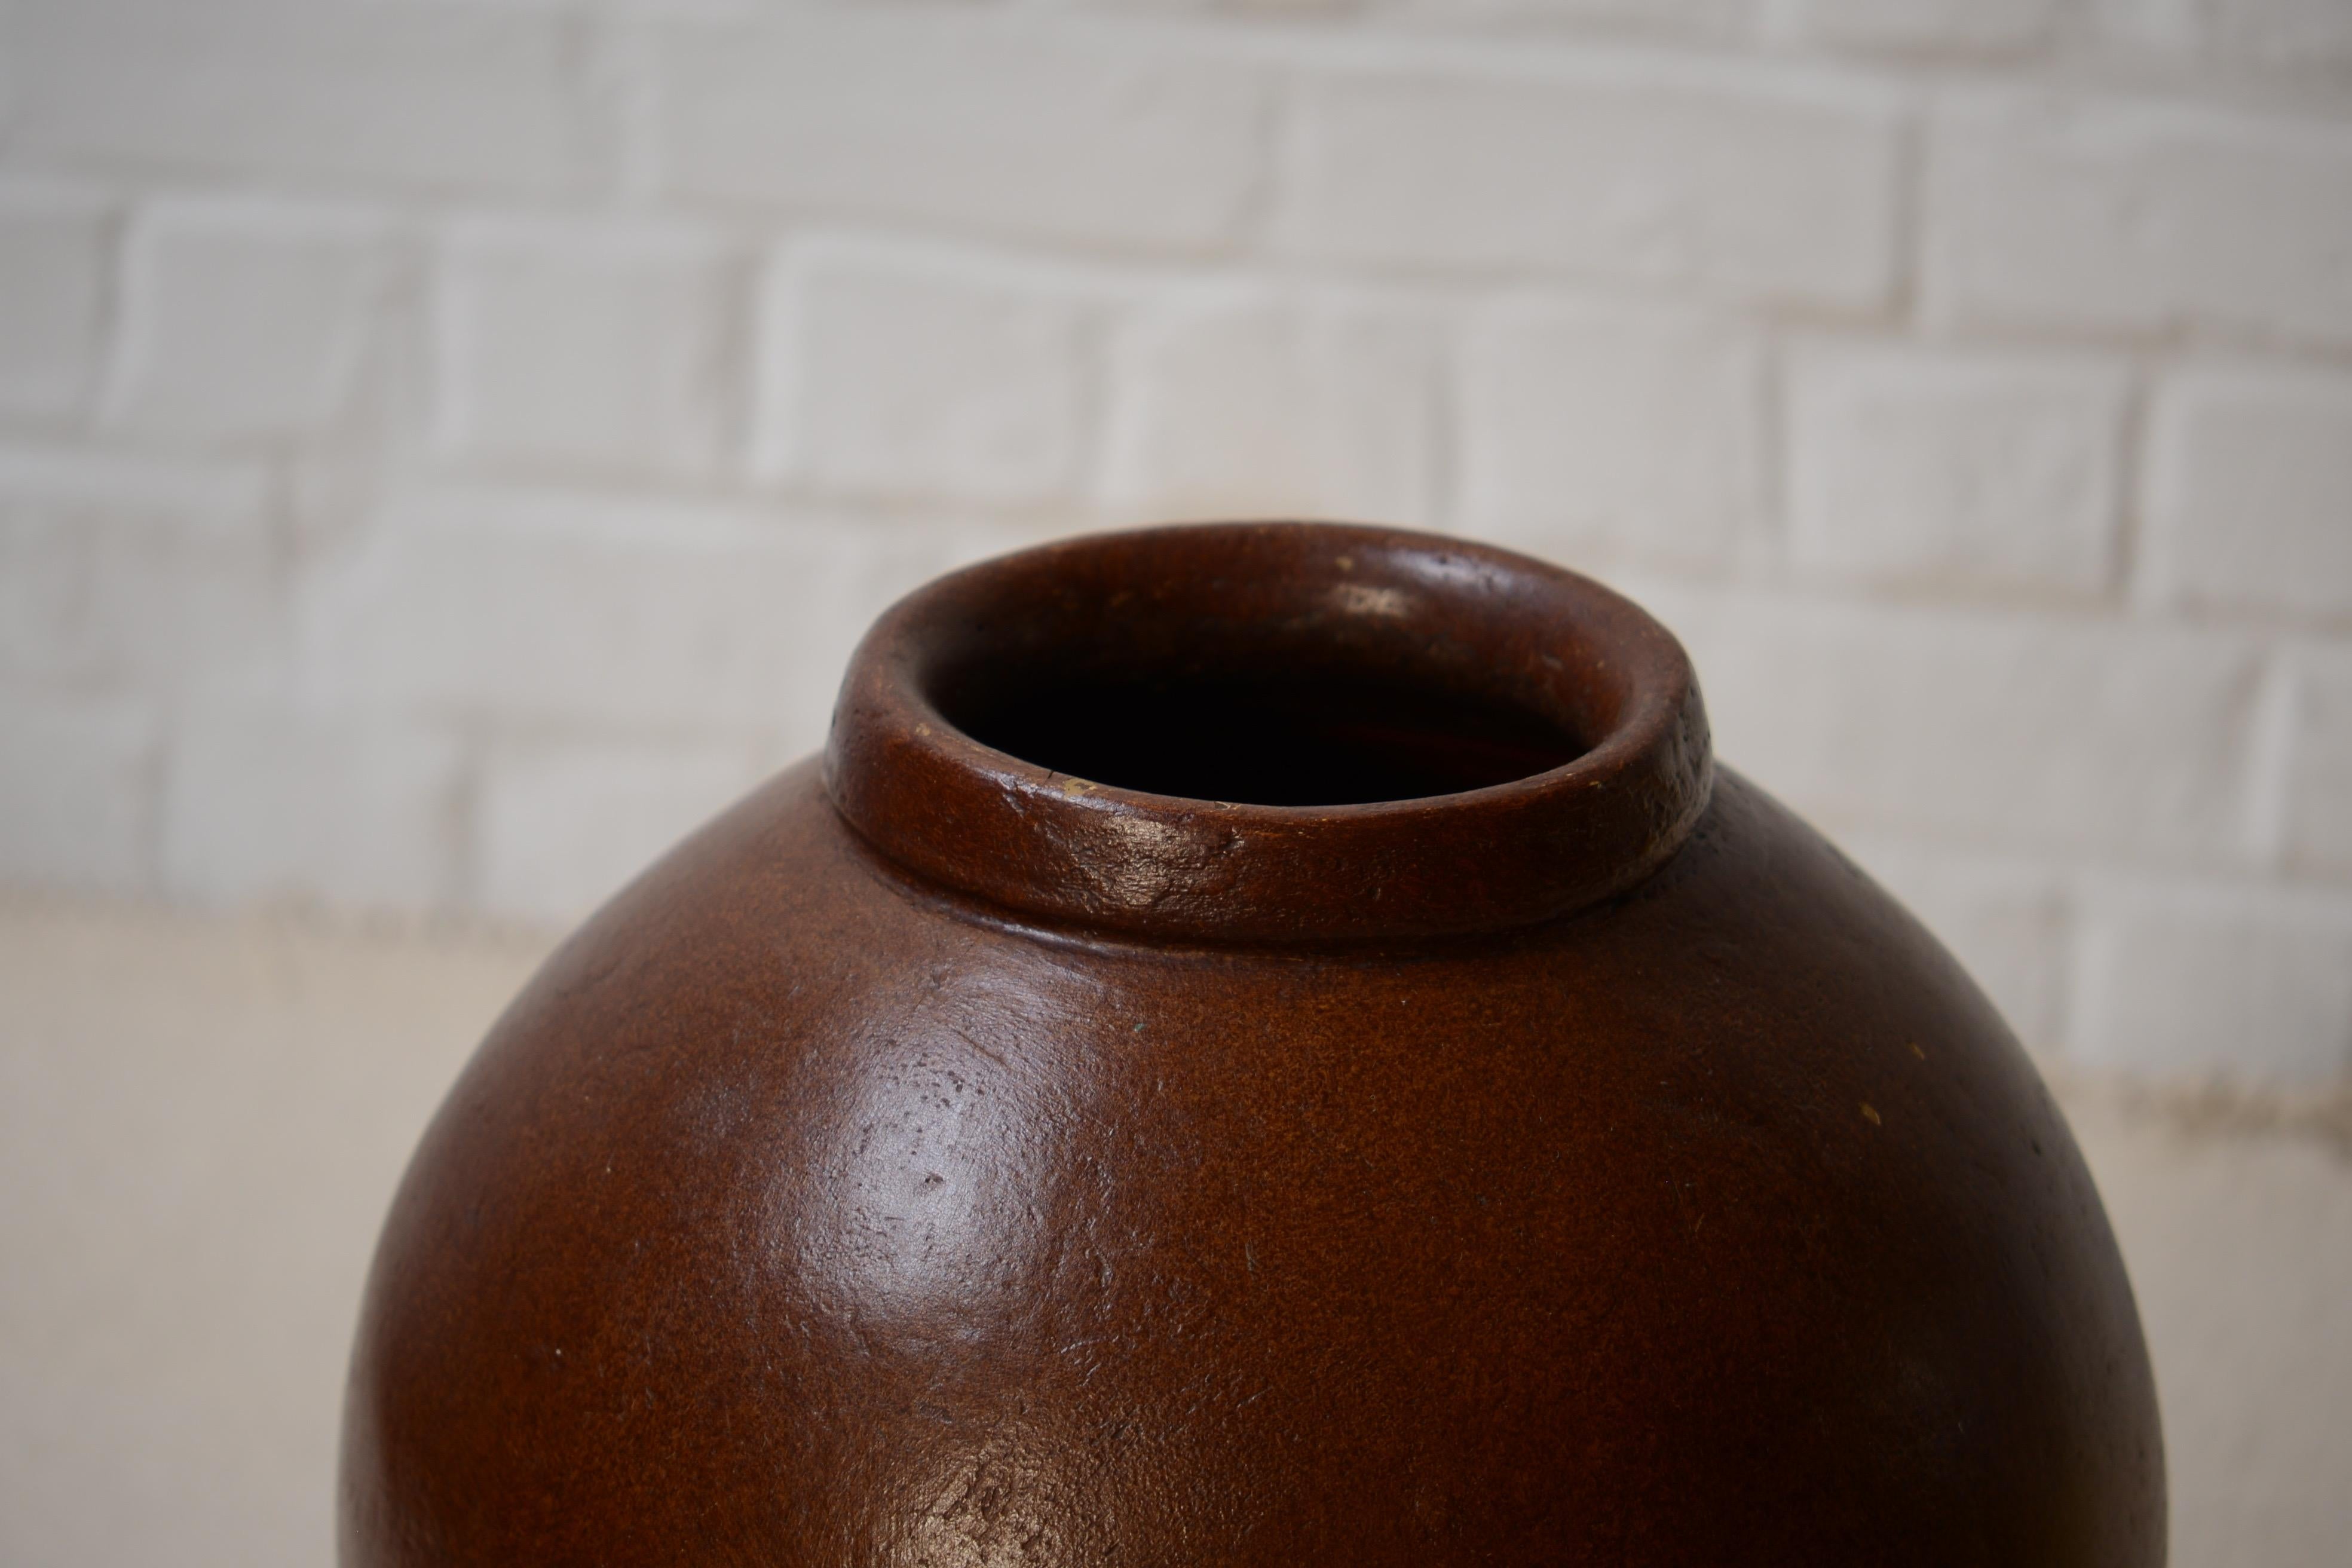 Interesting jar from the 19th century. Coming from Sweden and used by folks in the countryside. Warm tones glaze, with nice details to the foot. Very good condition.